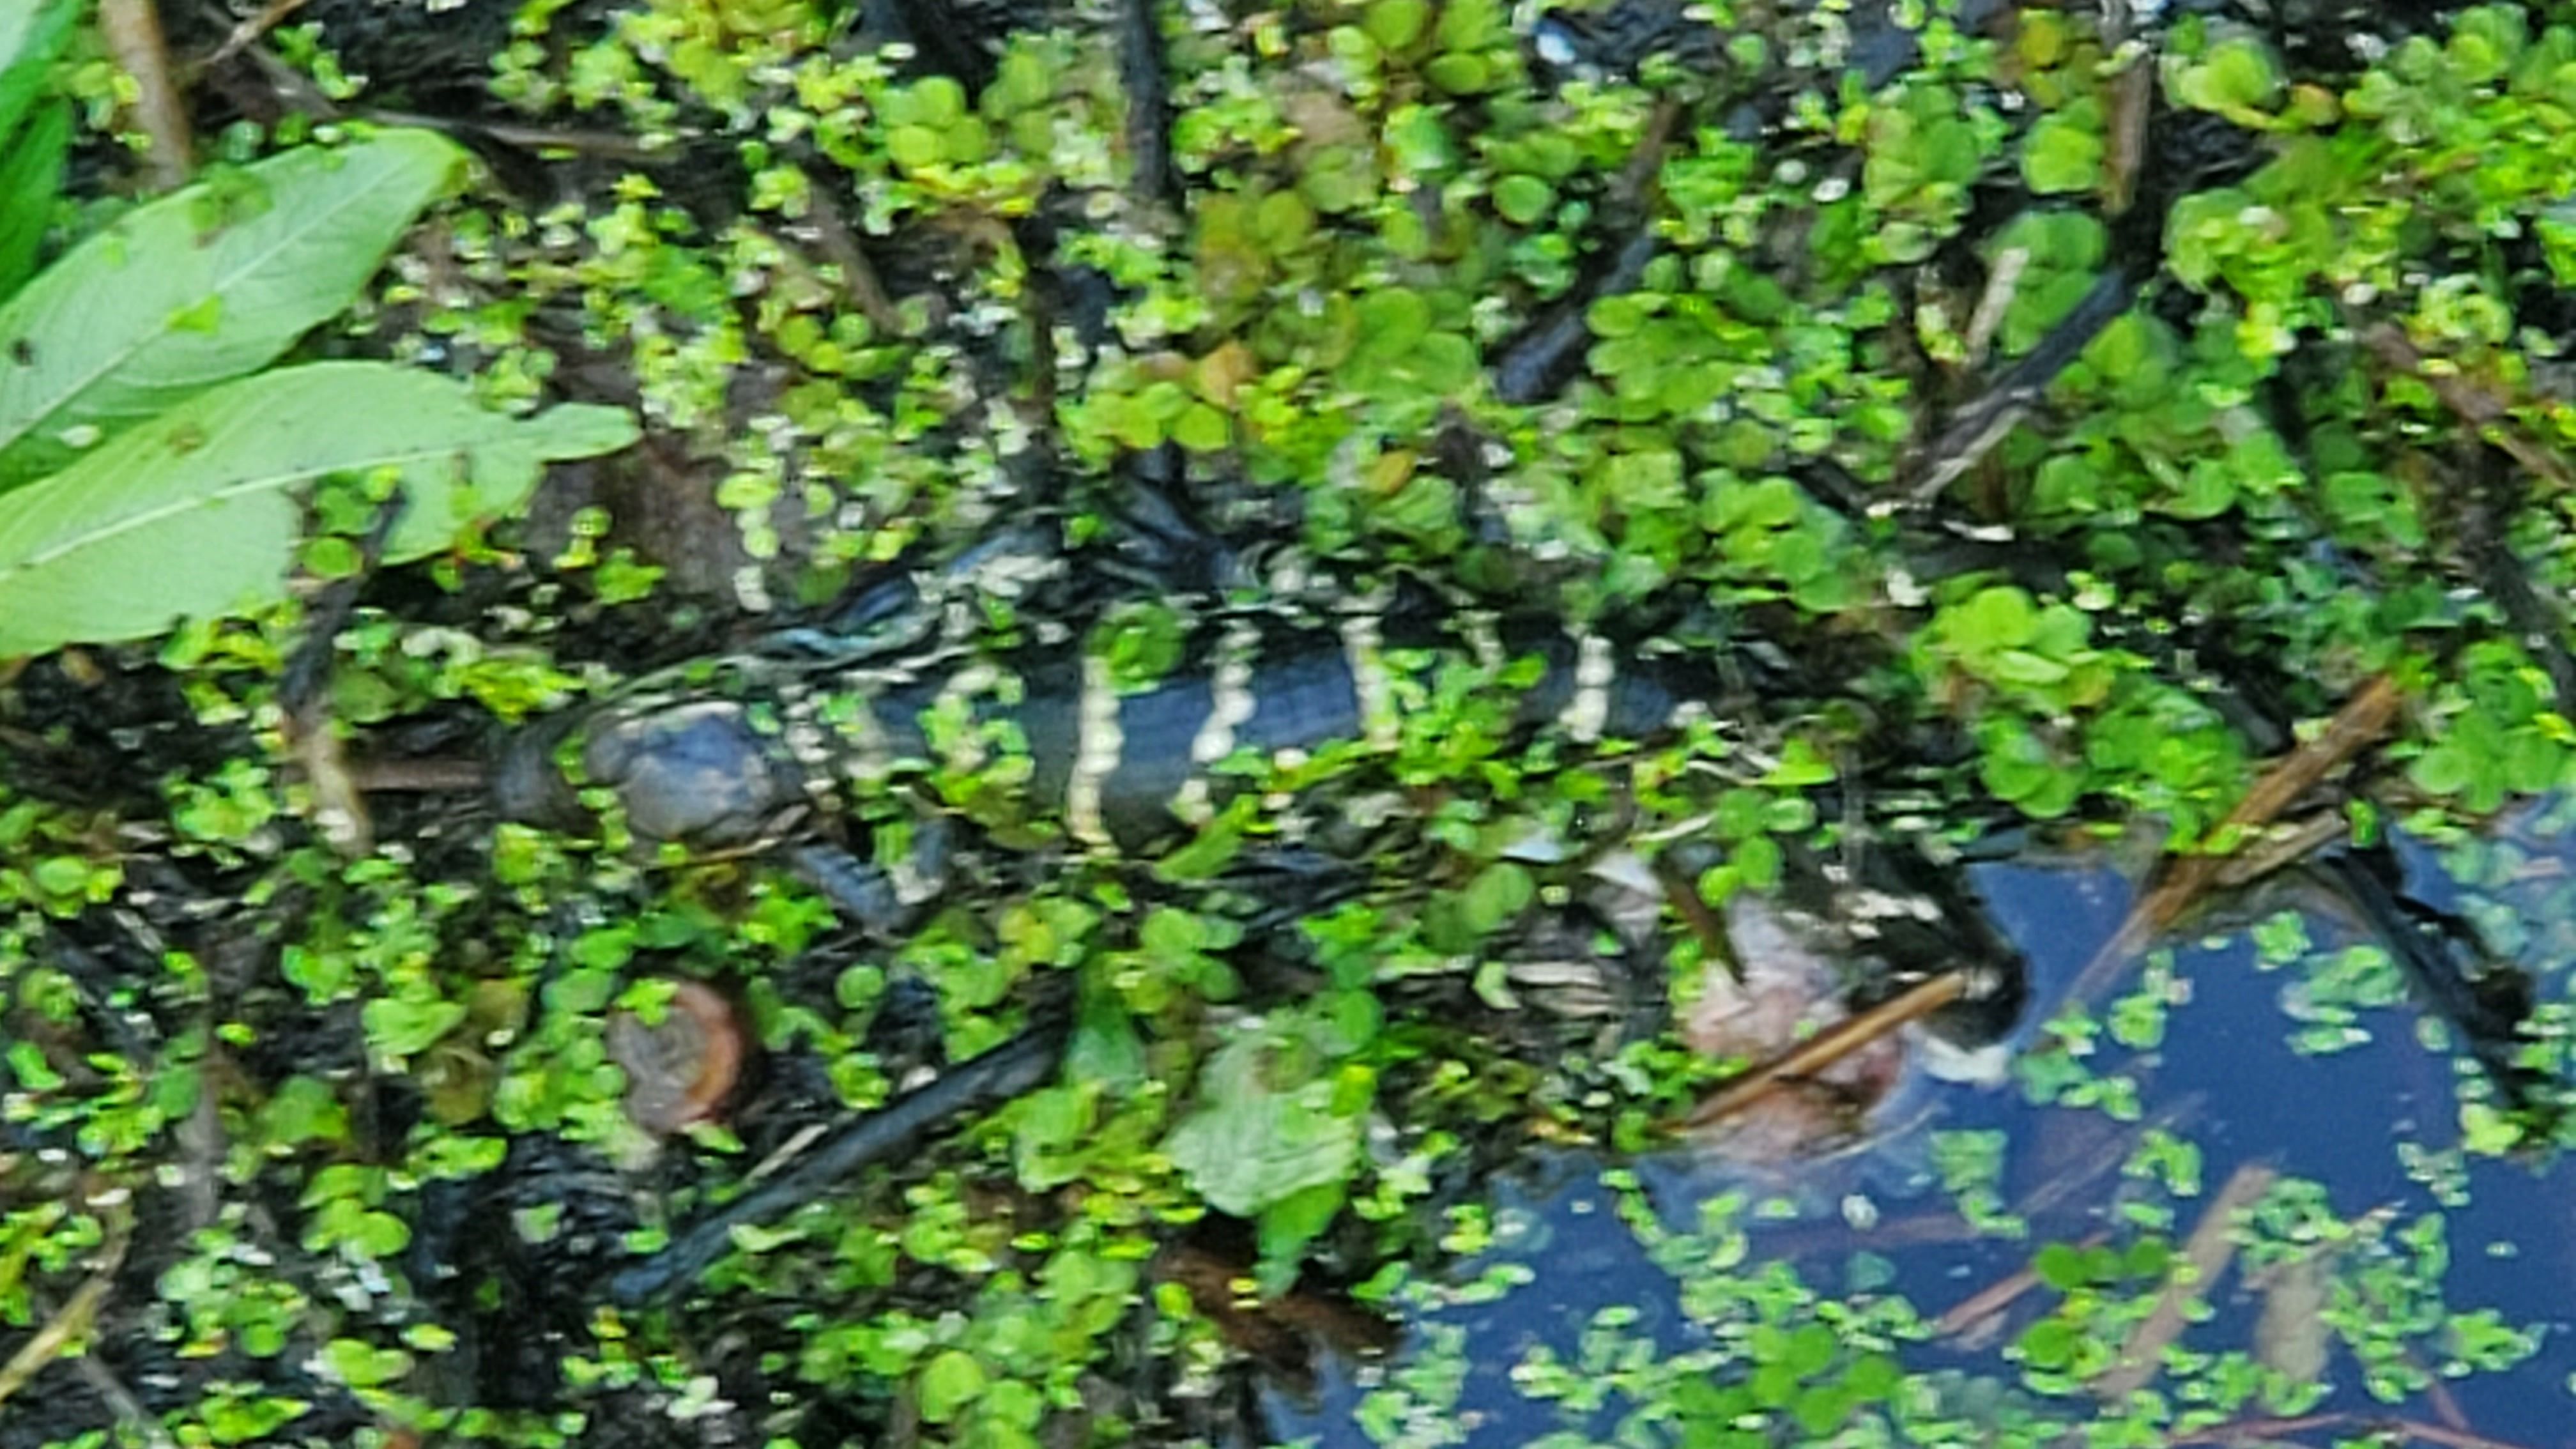 Baby gator is resting among the pond weed as it tries to blend into the landscape